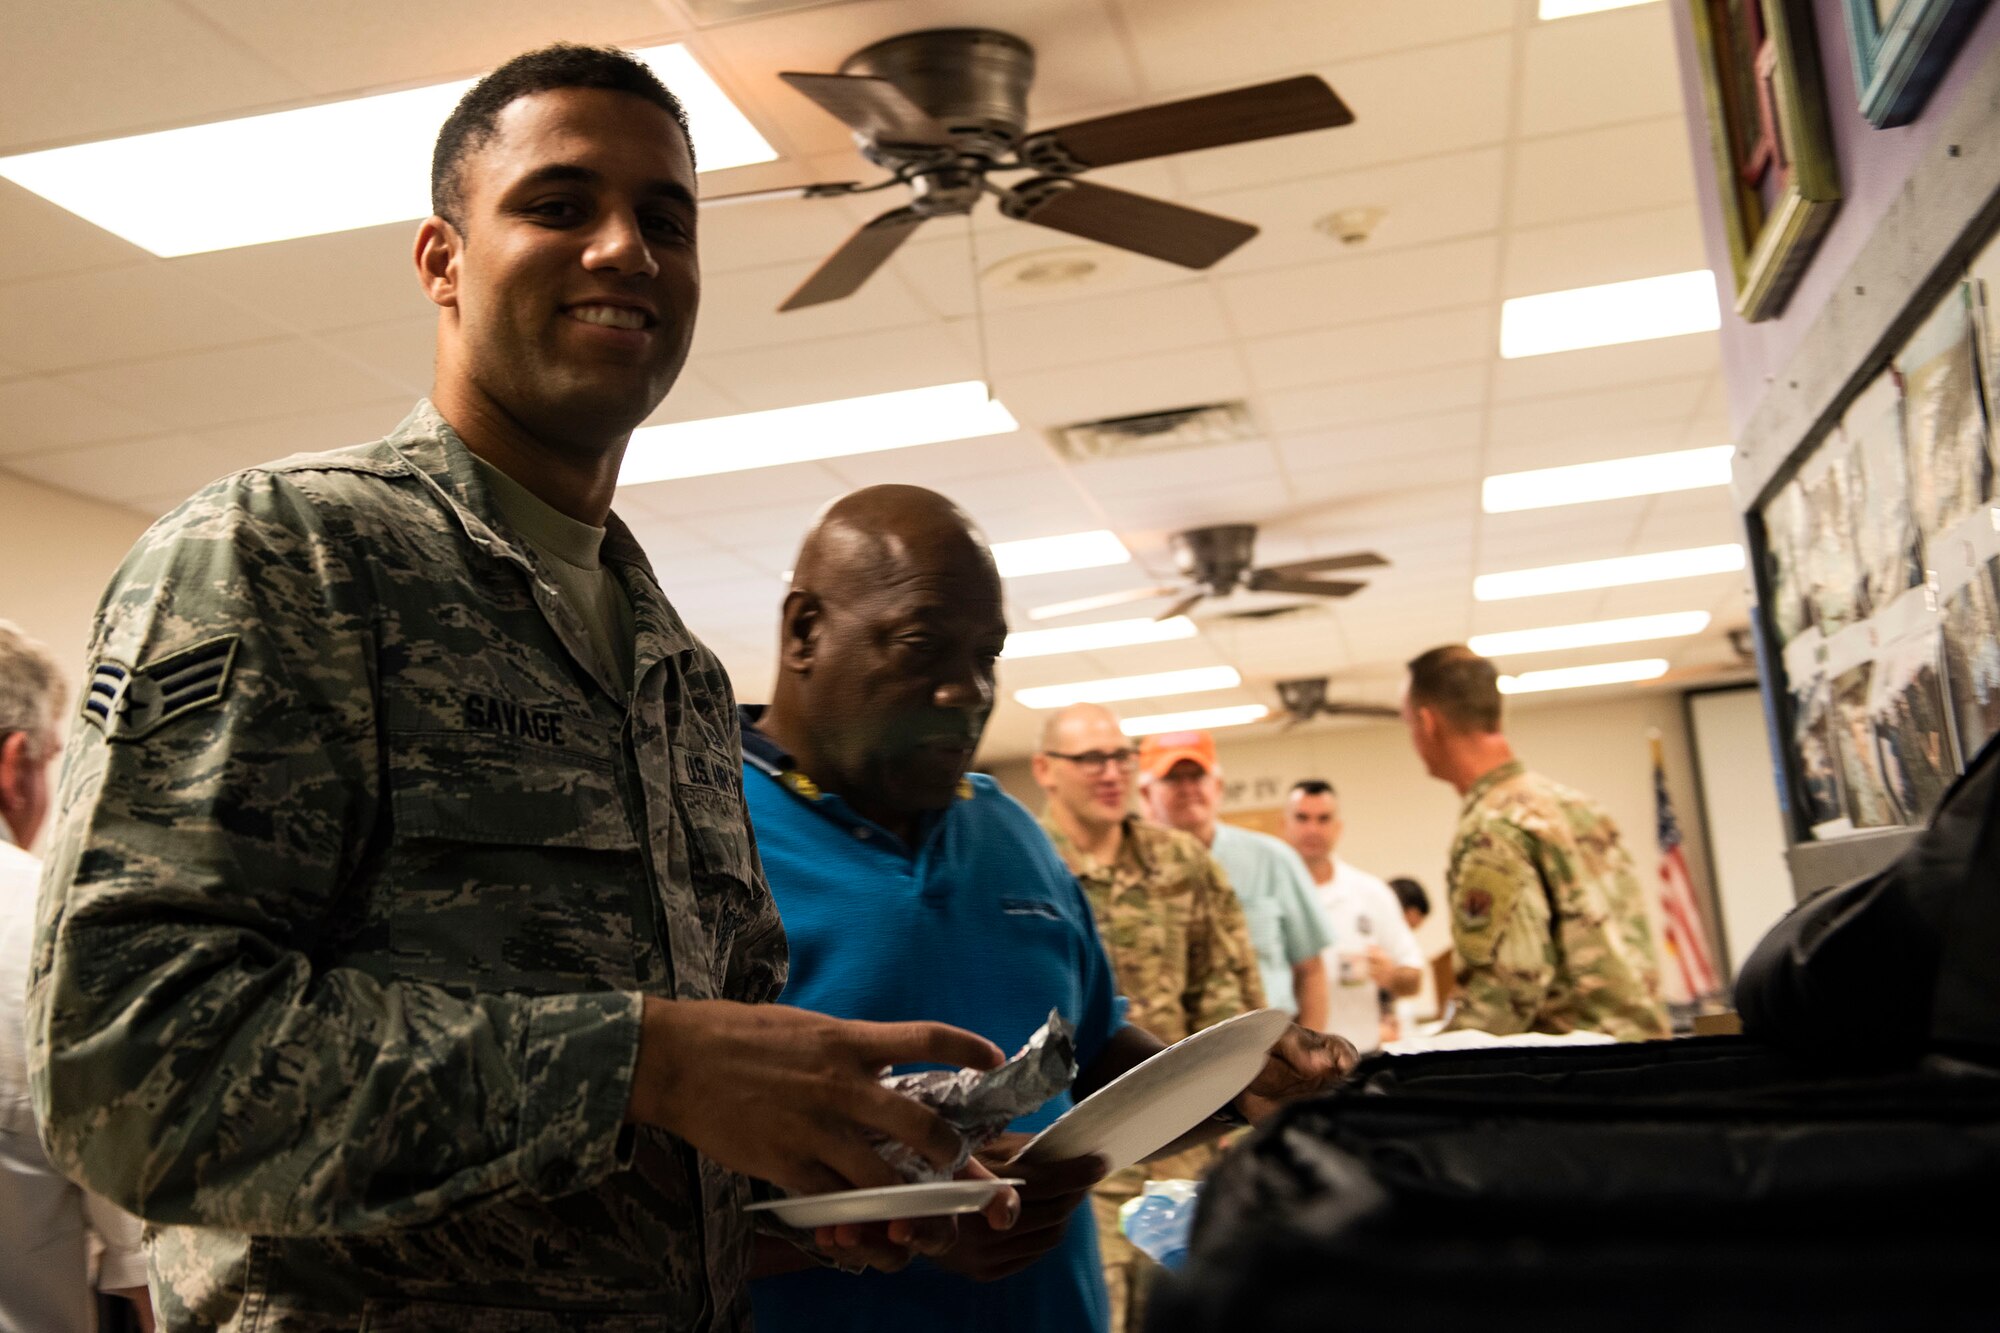 Senior Airman Savage, 23d Civil Engineer Squadron firefighter, smiles while getting food during resiliency training Sept. 10, 2019, at Moody Air Force Base, Ga. The event was hosted by the 23d Wing chaplain, and served as an interactive experience for Airmen, providing practical approaches they can use regularly to improve the resiliency culture in their squadrons. (U.S. Air Force photo by Senior Airman Erick Requadt)